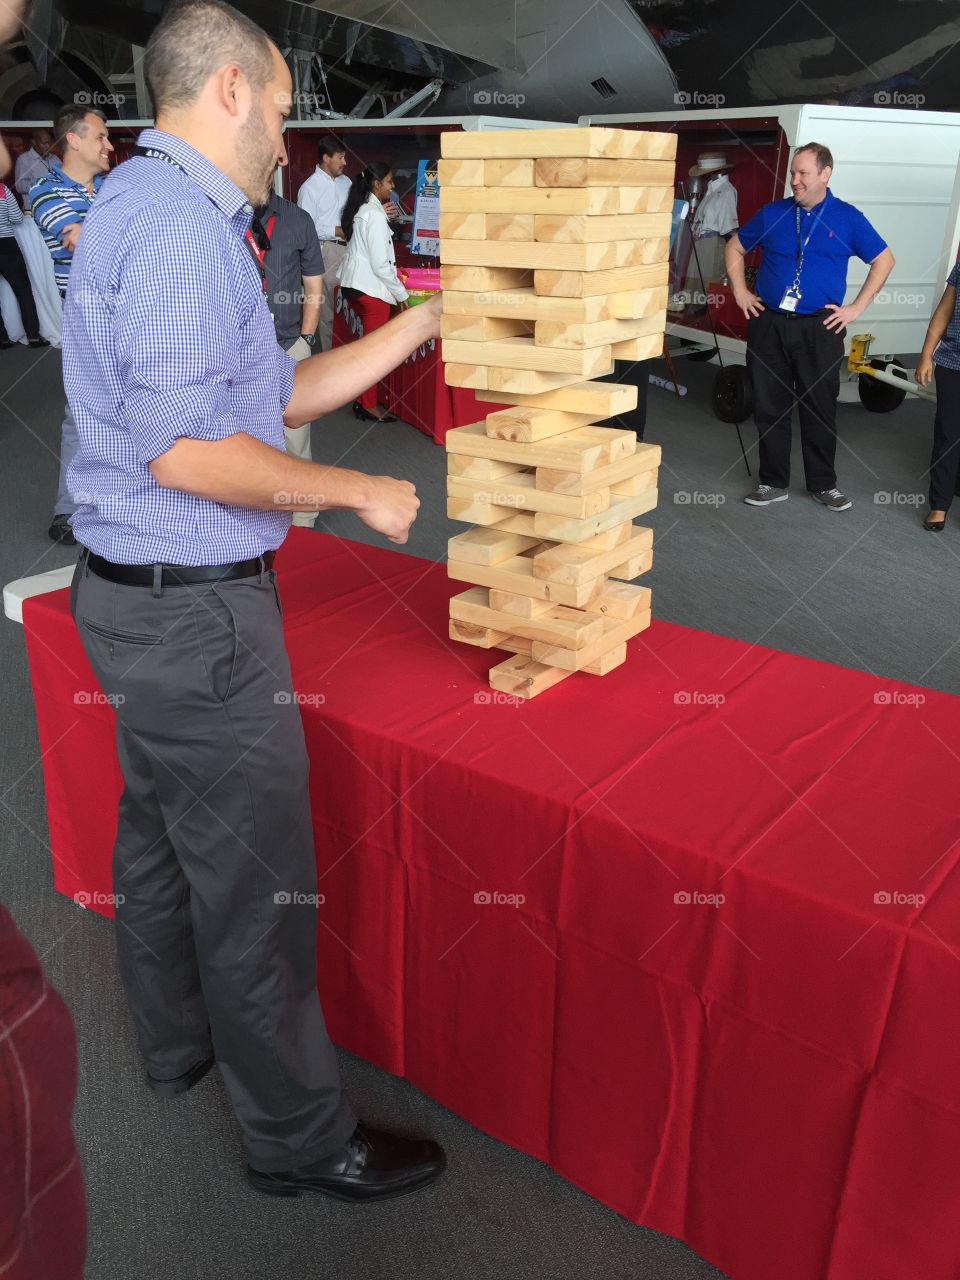 Playing Jenga at office party 